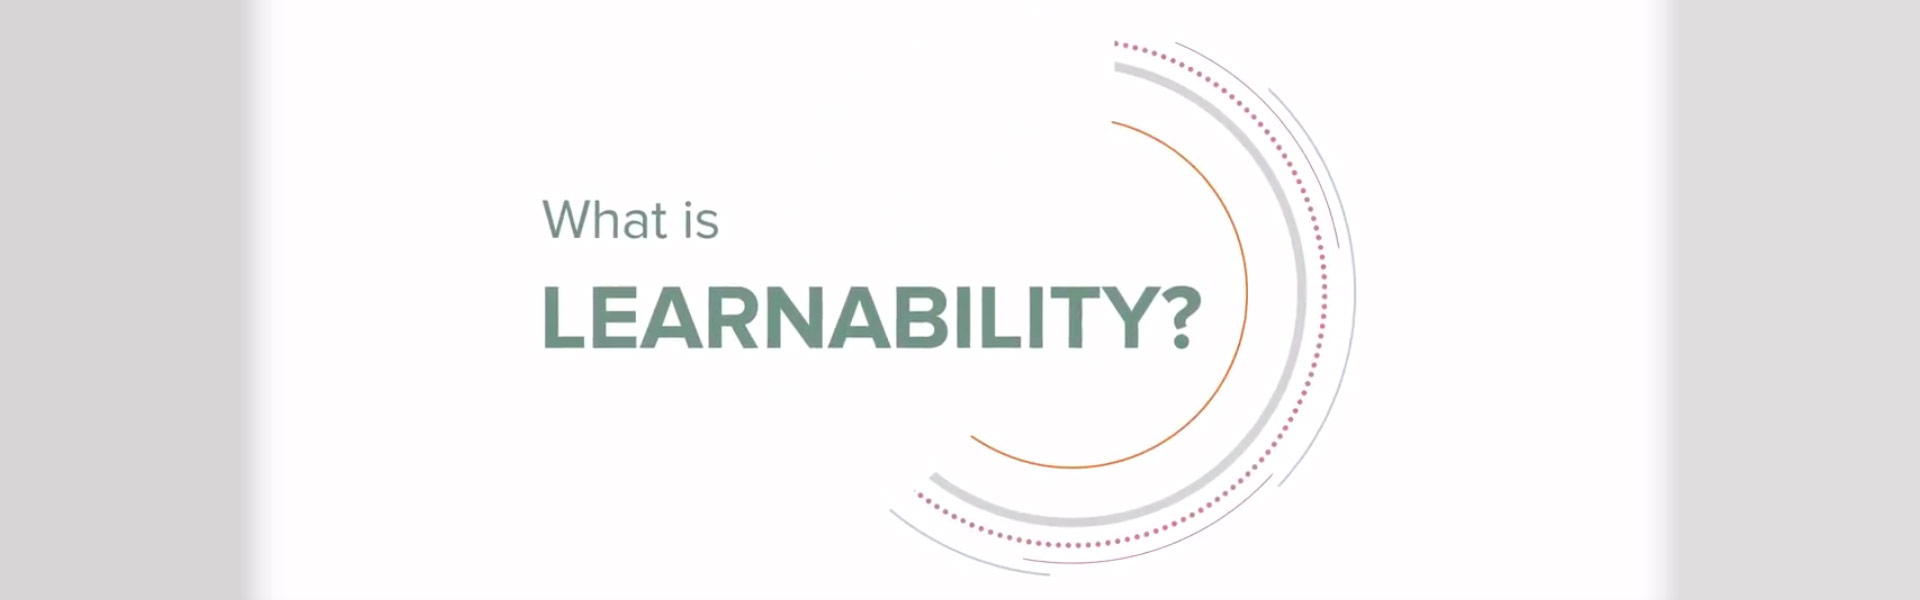 What is learnability?